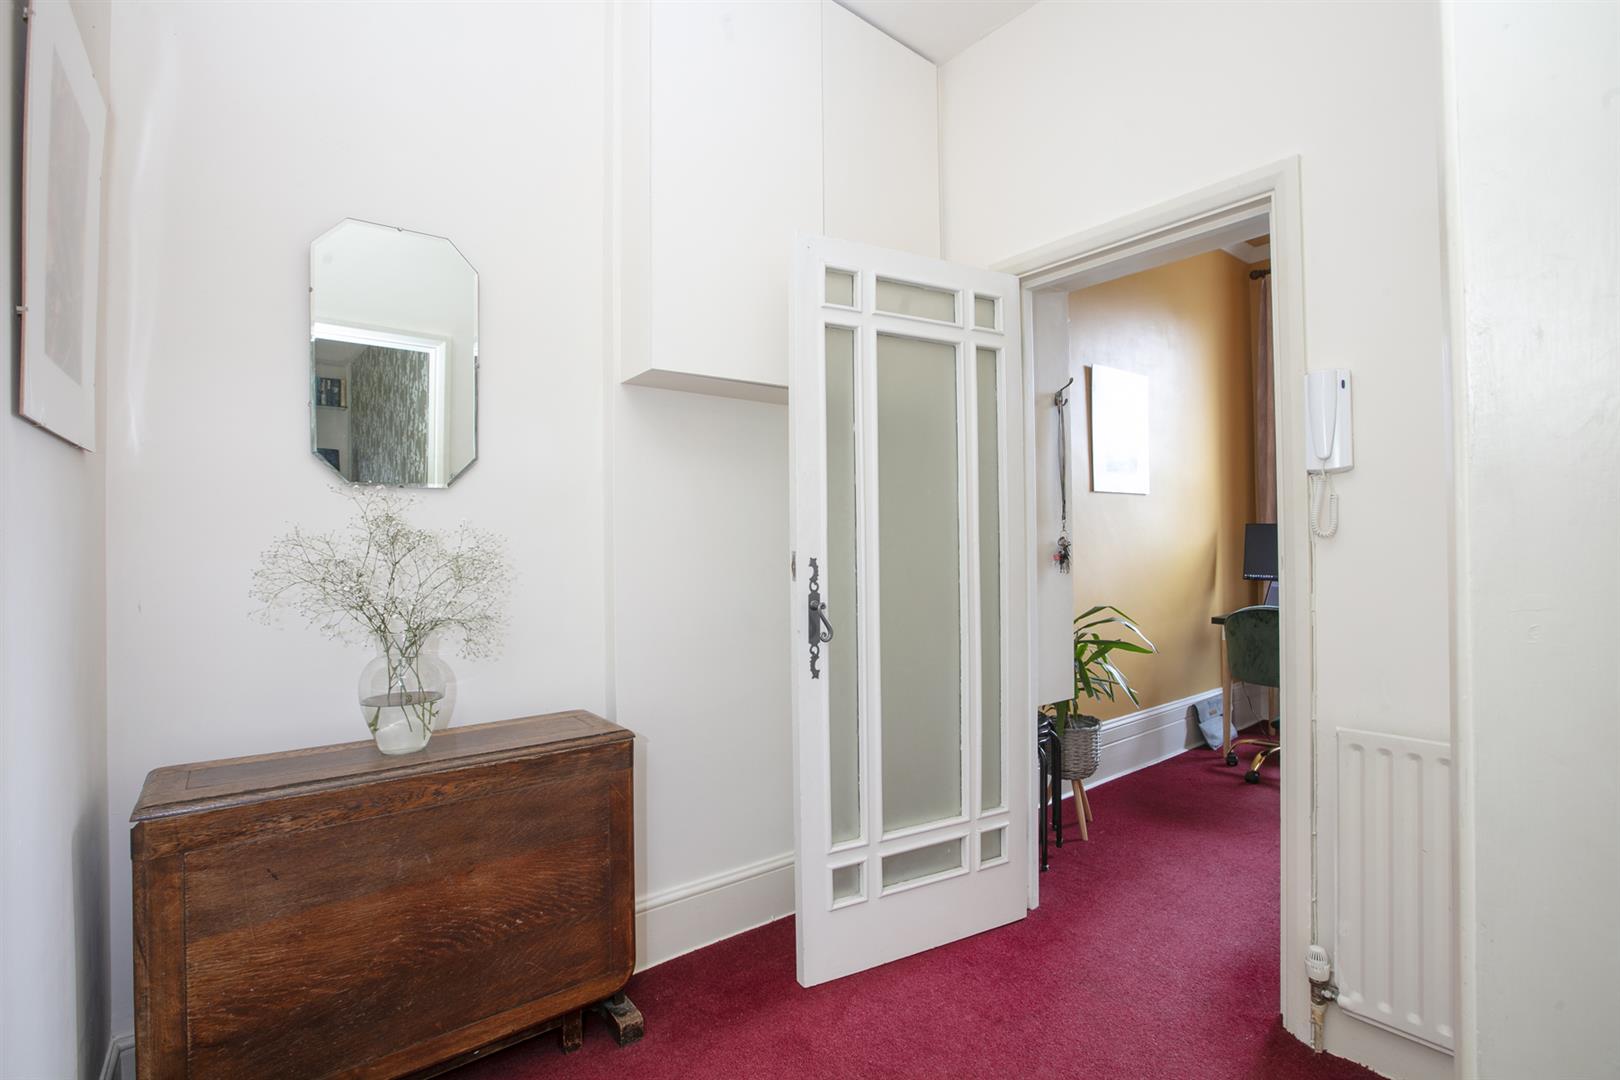 Flat - Conversion Sold in Peckham Road, Camberwell, SE5 859 view12